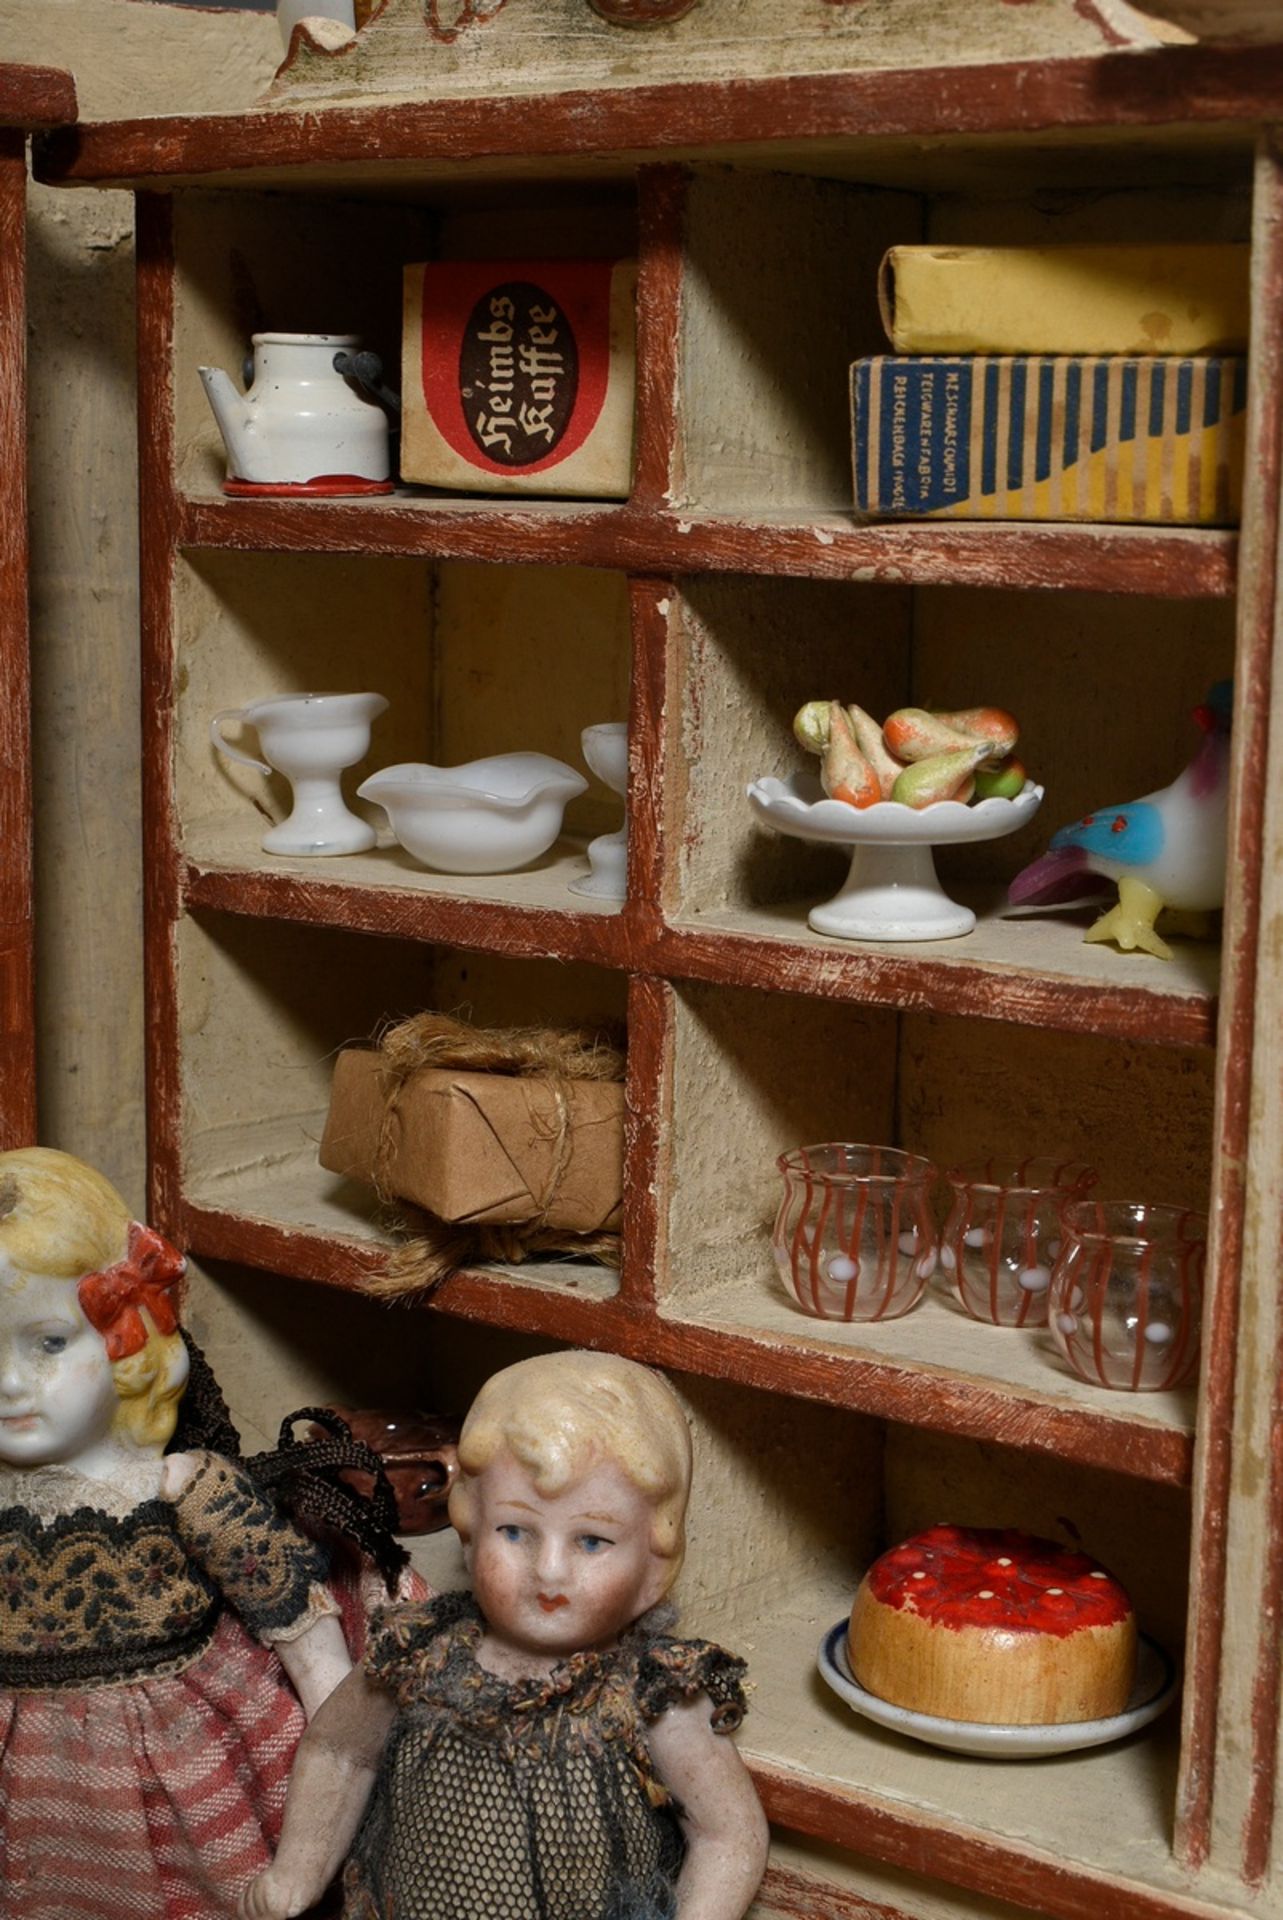 Dolls' shop with dolls and rich interior: e.g. pewter plates, glass bottles, porcelain jugs, around - Image 12 of 14